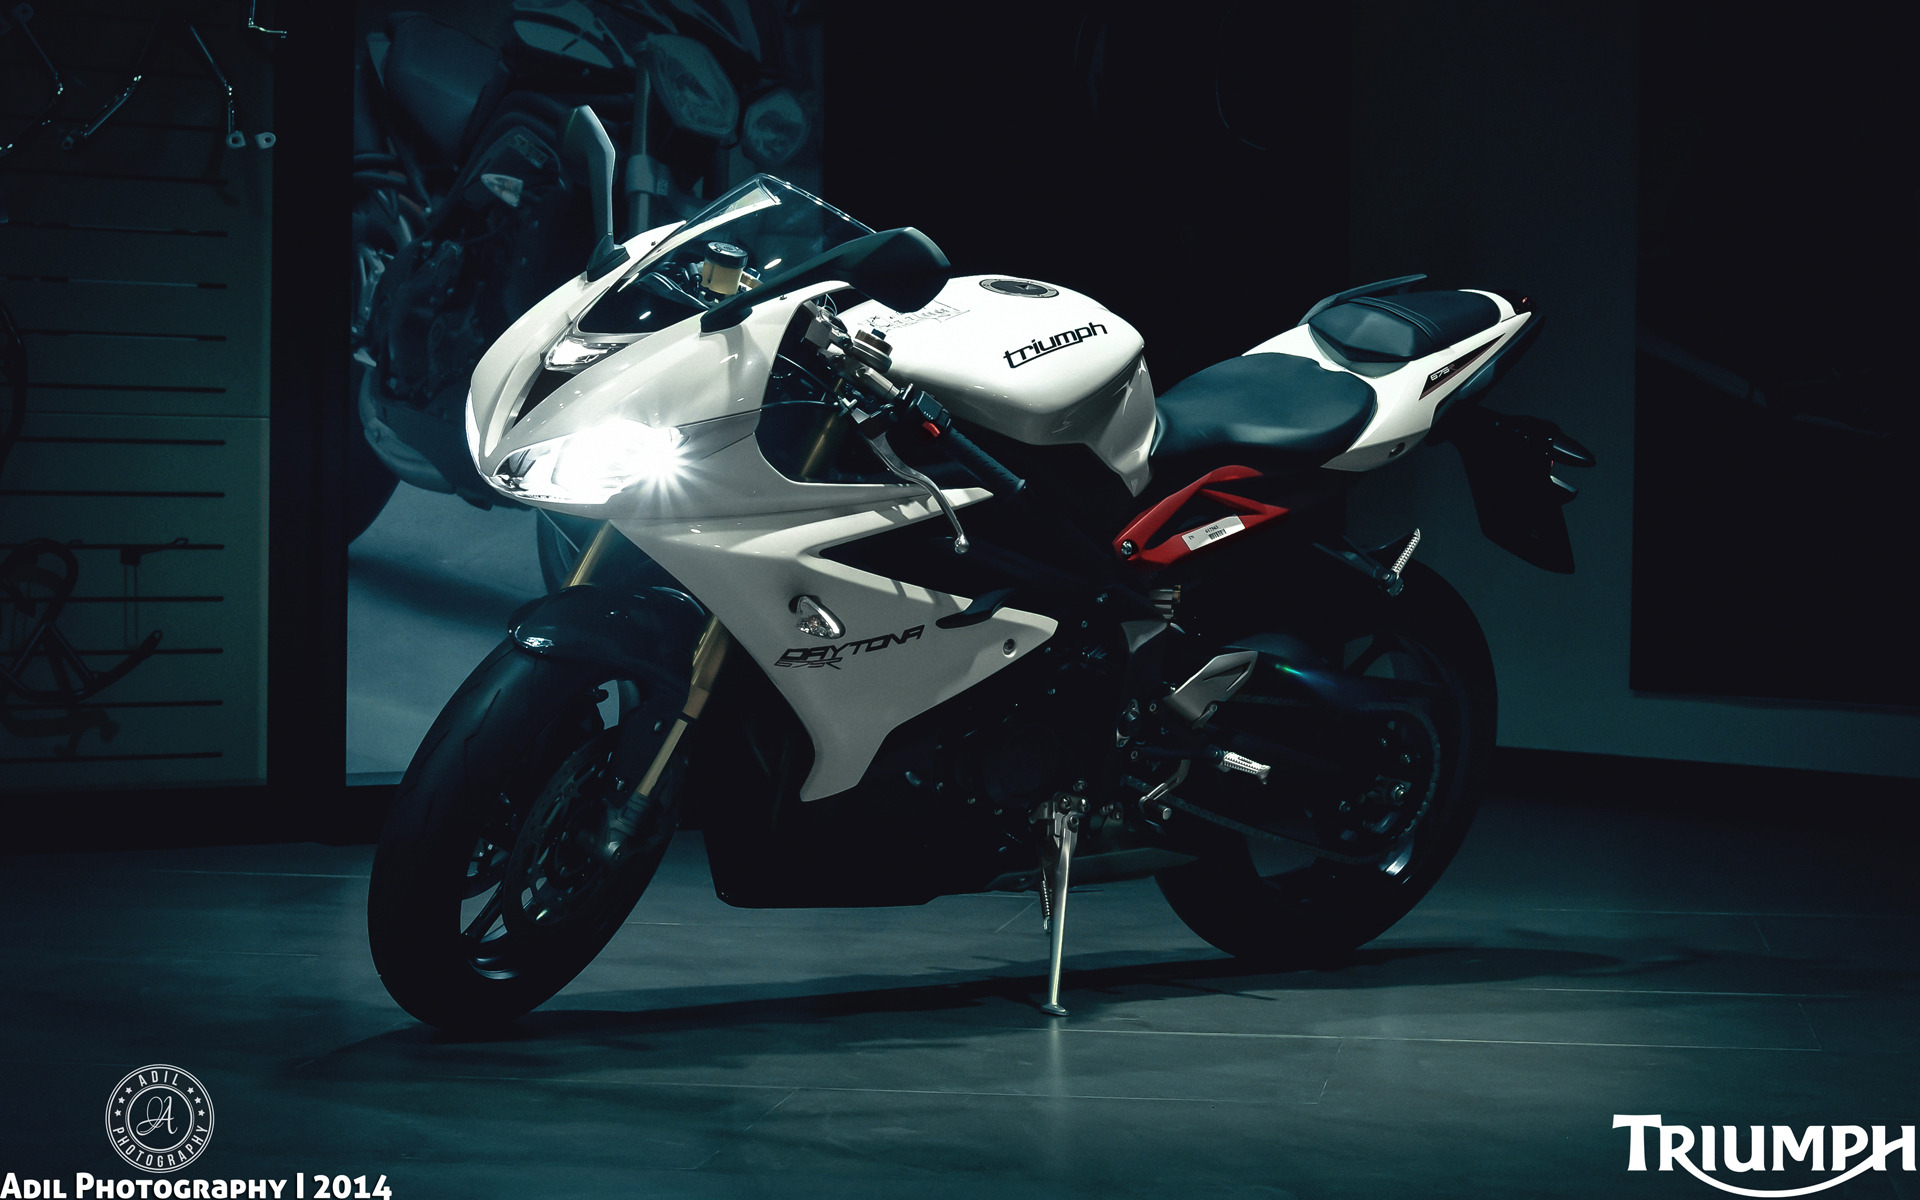 Free Download You Can Download Triumph Daytona 675r Motorcycle Hd Wallpaper 19 19x10 For Your Desktop Mobile Tablet Explore 72 Triumph Motorcycle Wallpaper Triumph Scrambler Wallpaper Lingerie Motorcycle Wallpaper